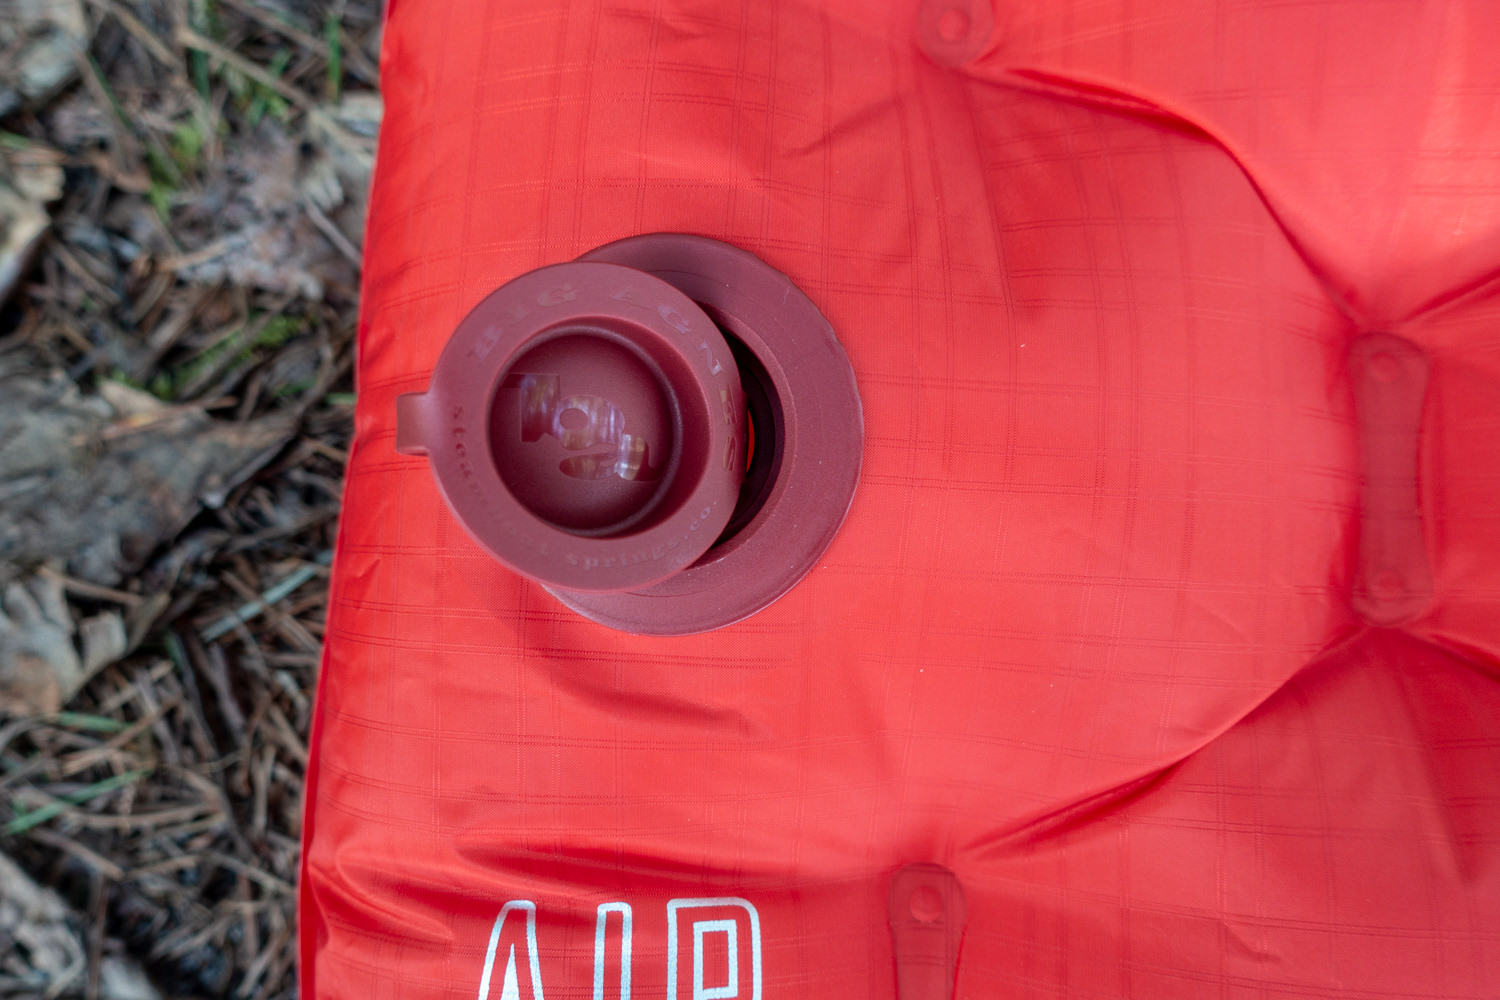 Review: Big Agnes Insulated AXL Pad